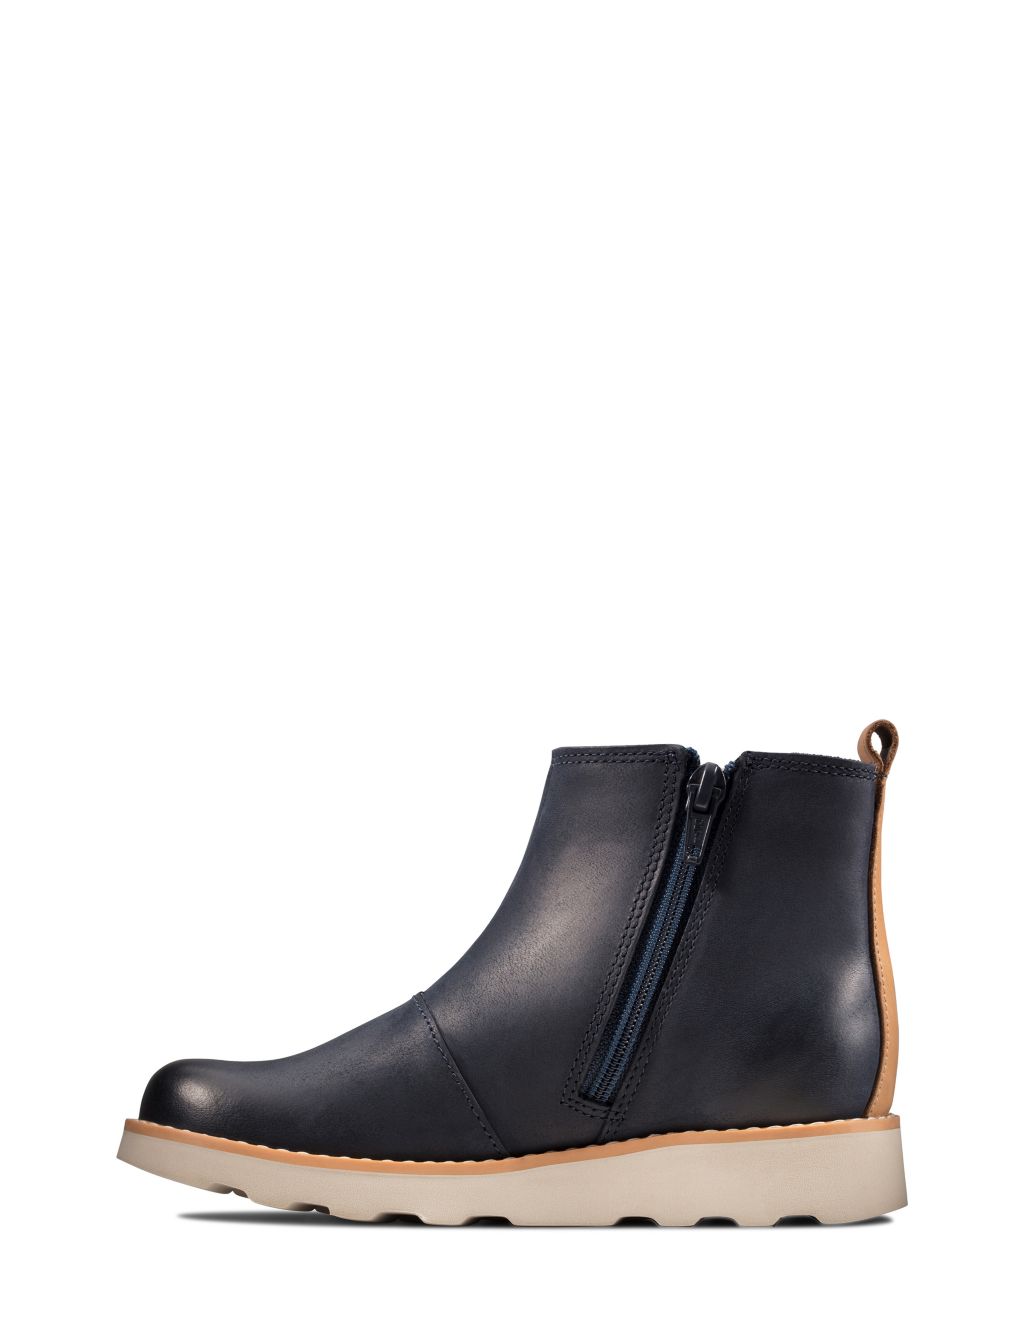 Kids' Leather Chelsea Boots image 4